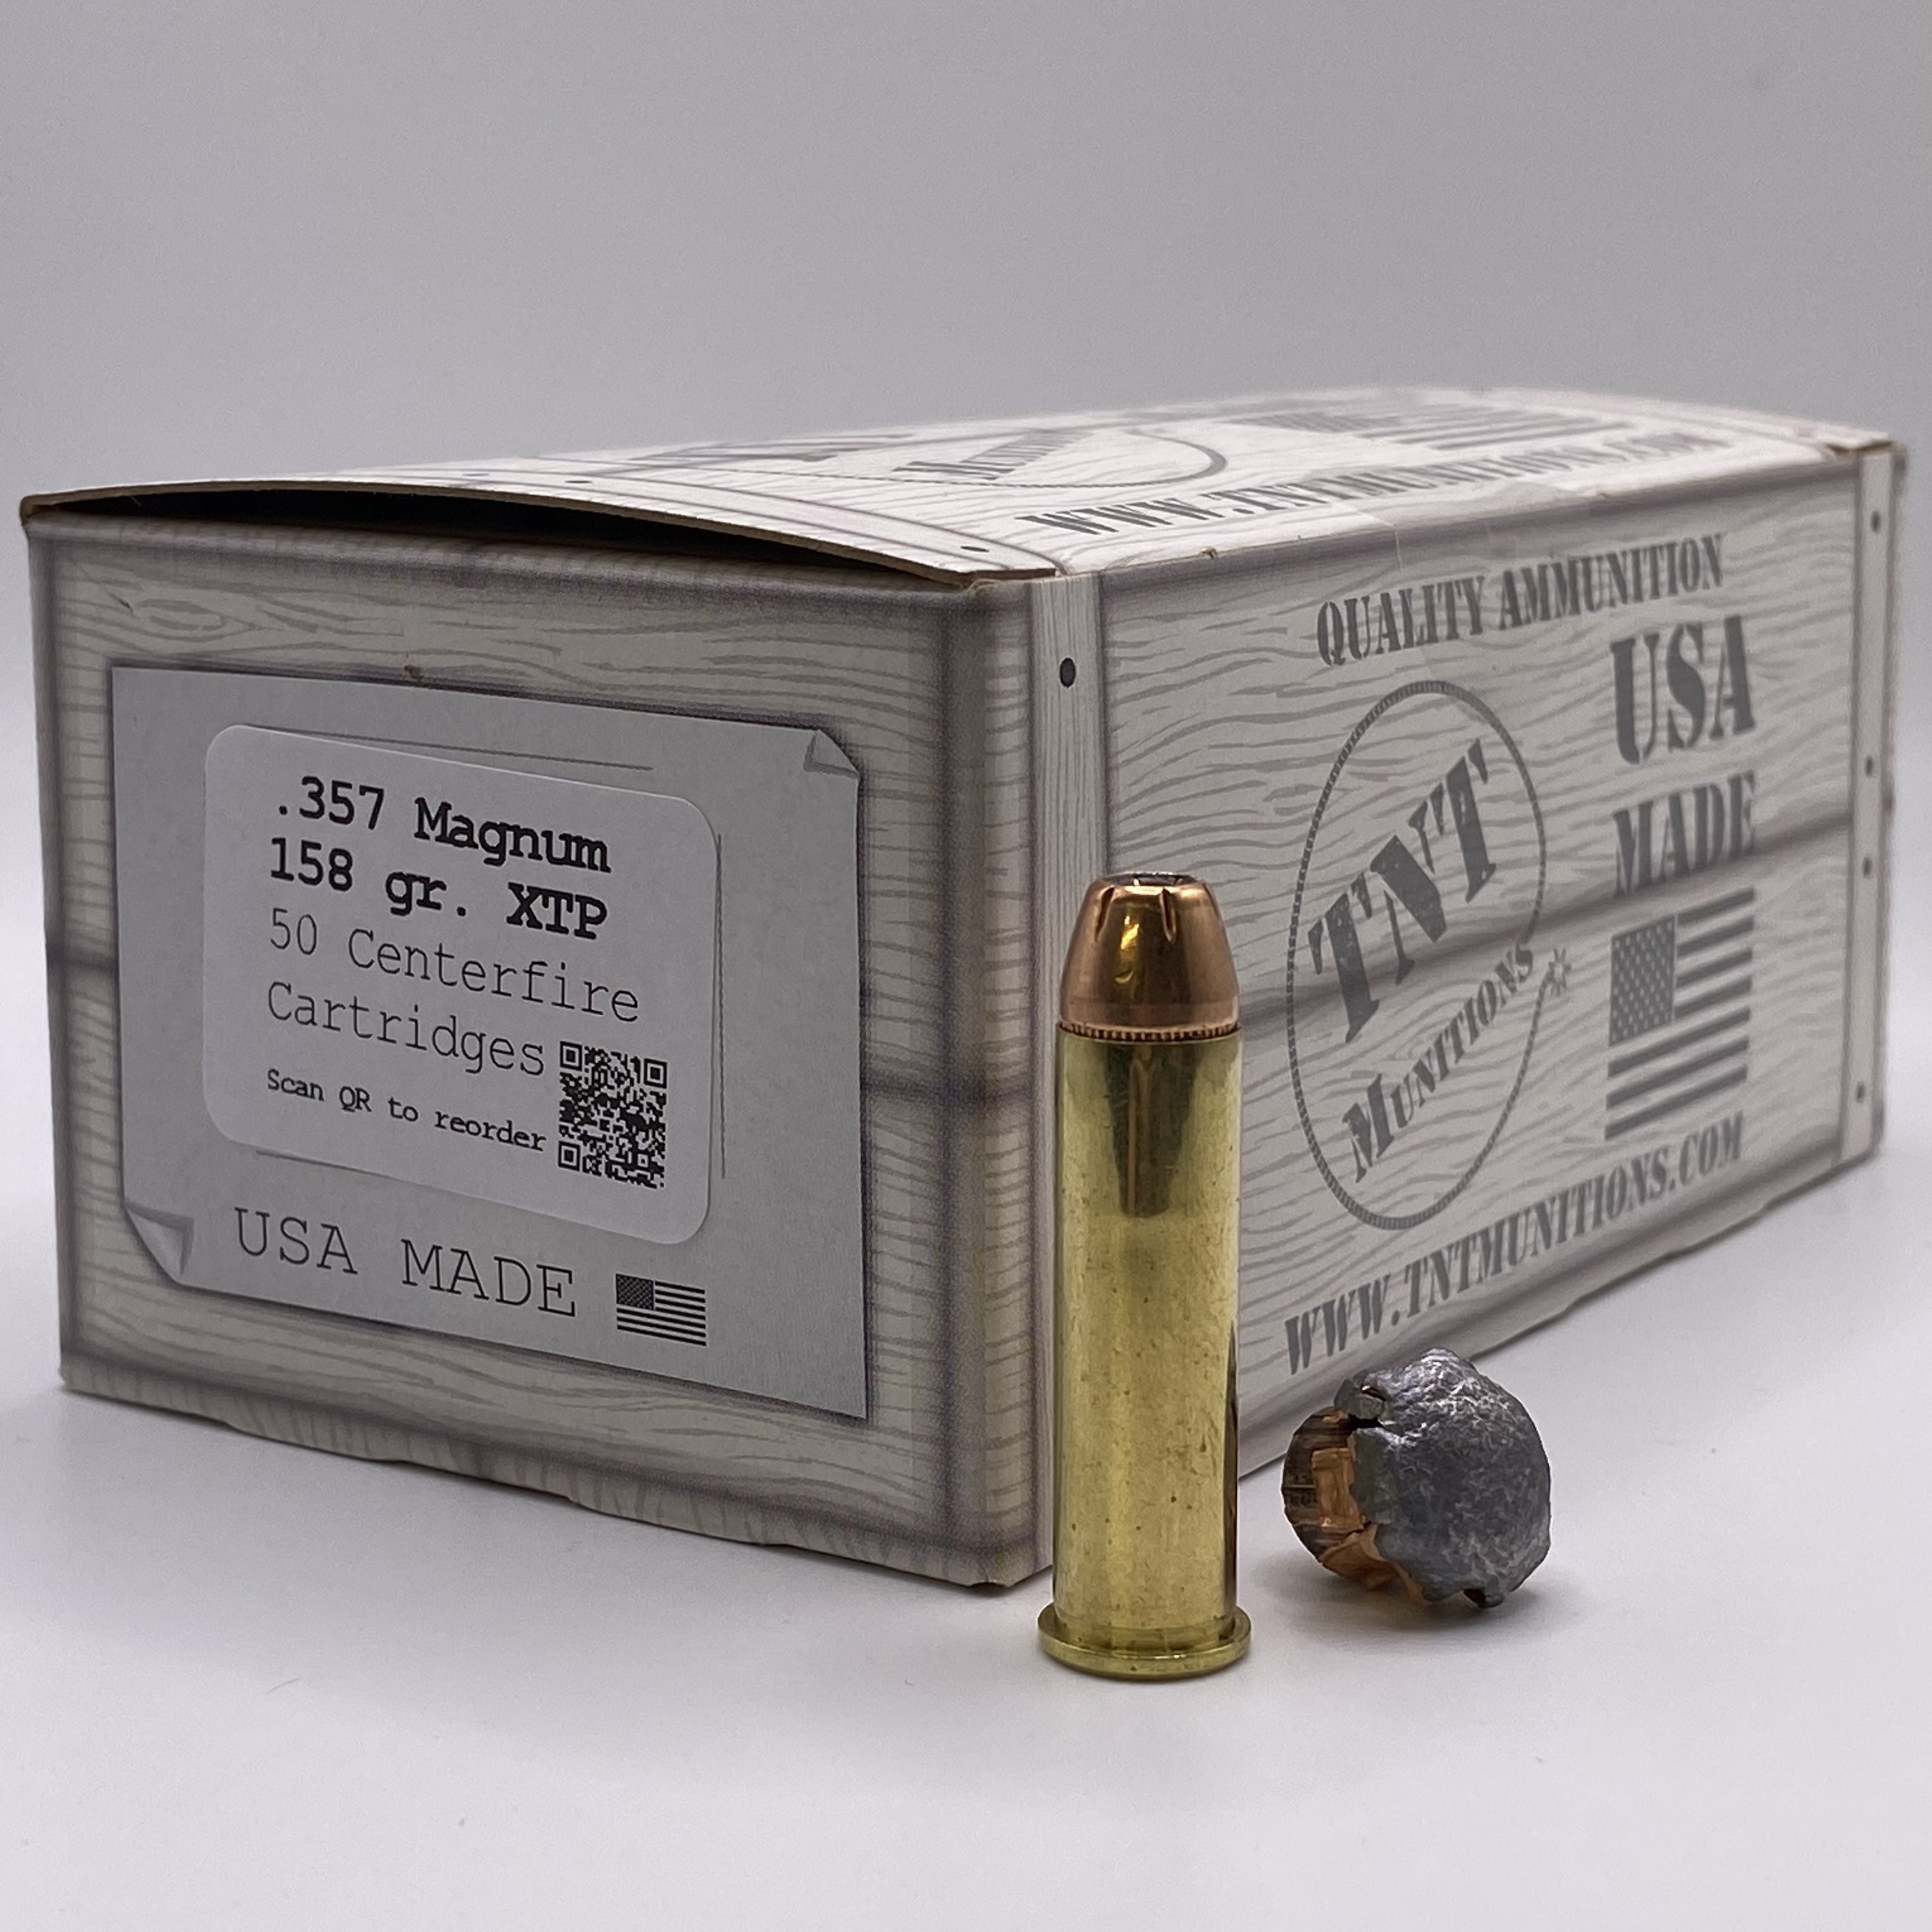 .357 Magnum 158 gr. XTP Defense. MEMORIAL DAY SALE! THROUGH MAY 29TH ONLY - SHIPS NBD